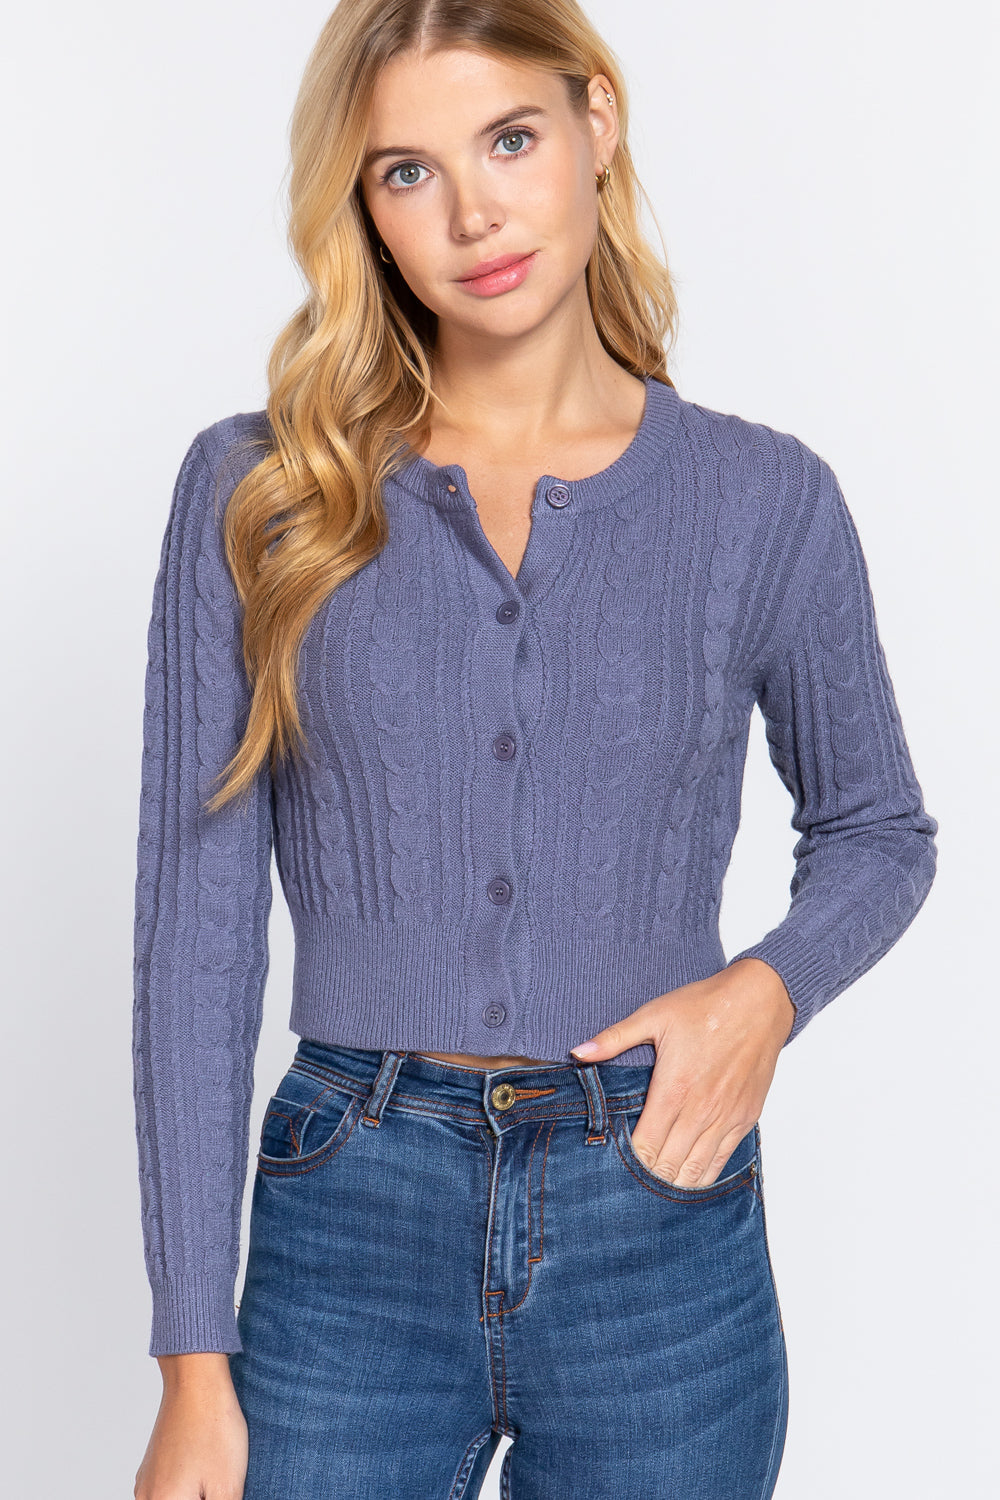 Gloomy Blue Crew Neck Cable Sweater Cardigan - 4 colors - women's cardigan at TFC&H Co.